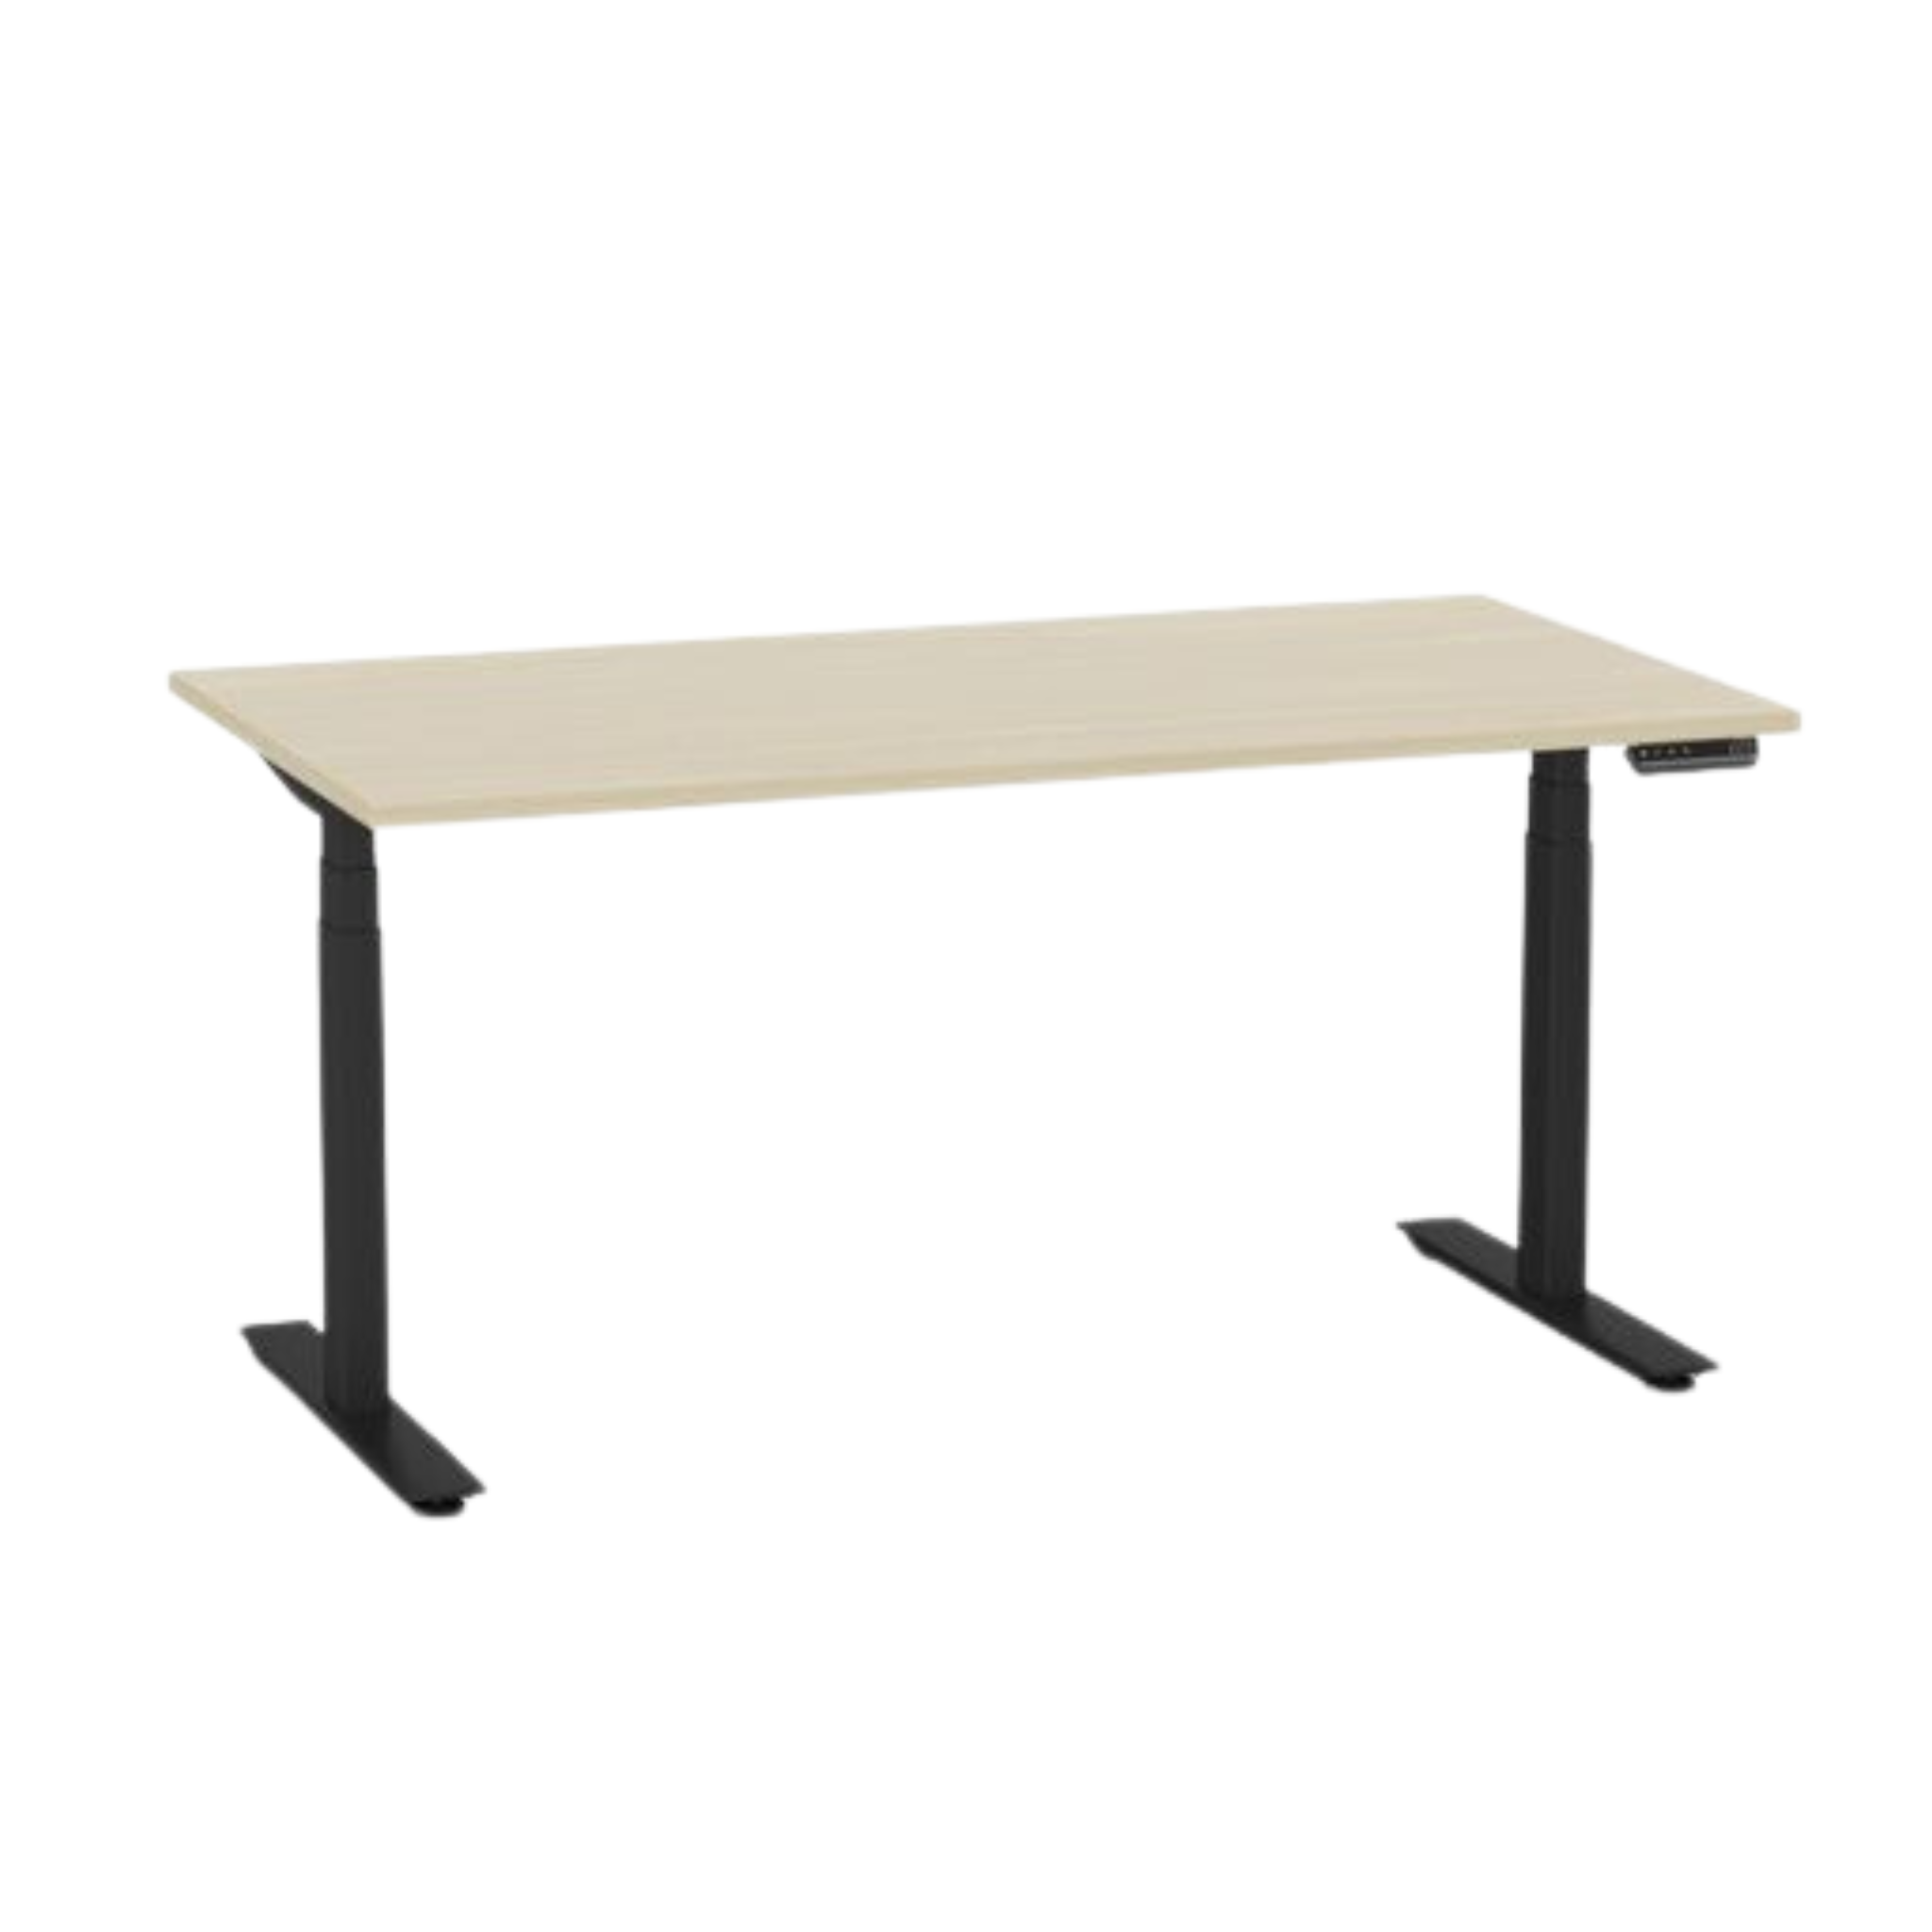 Agile Pro electric sit to stand desk with black frame and nordic maple top